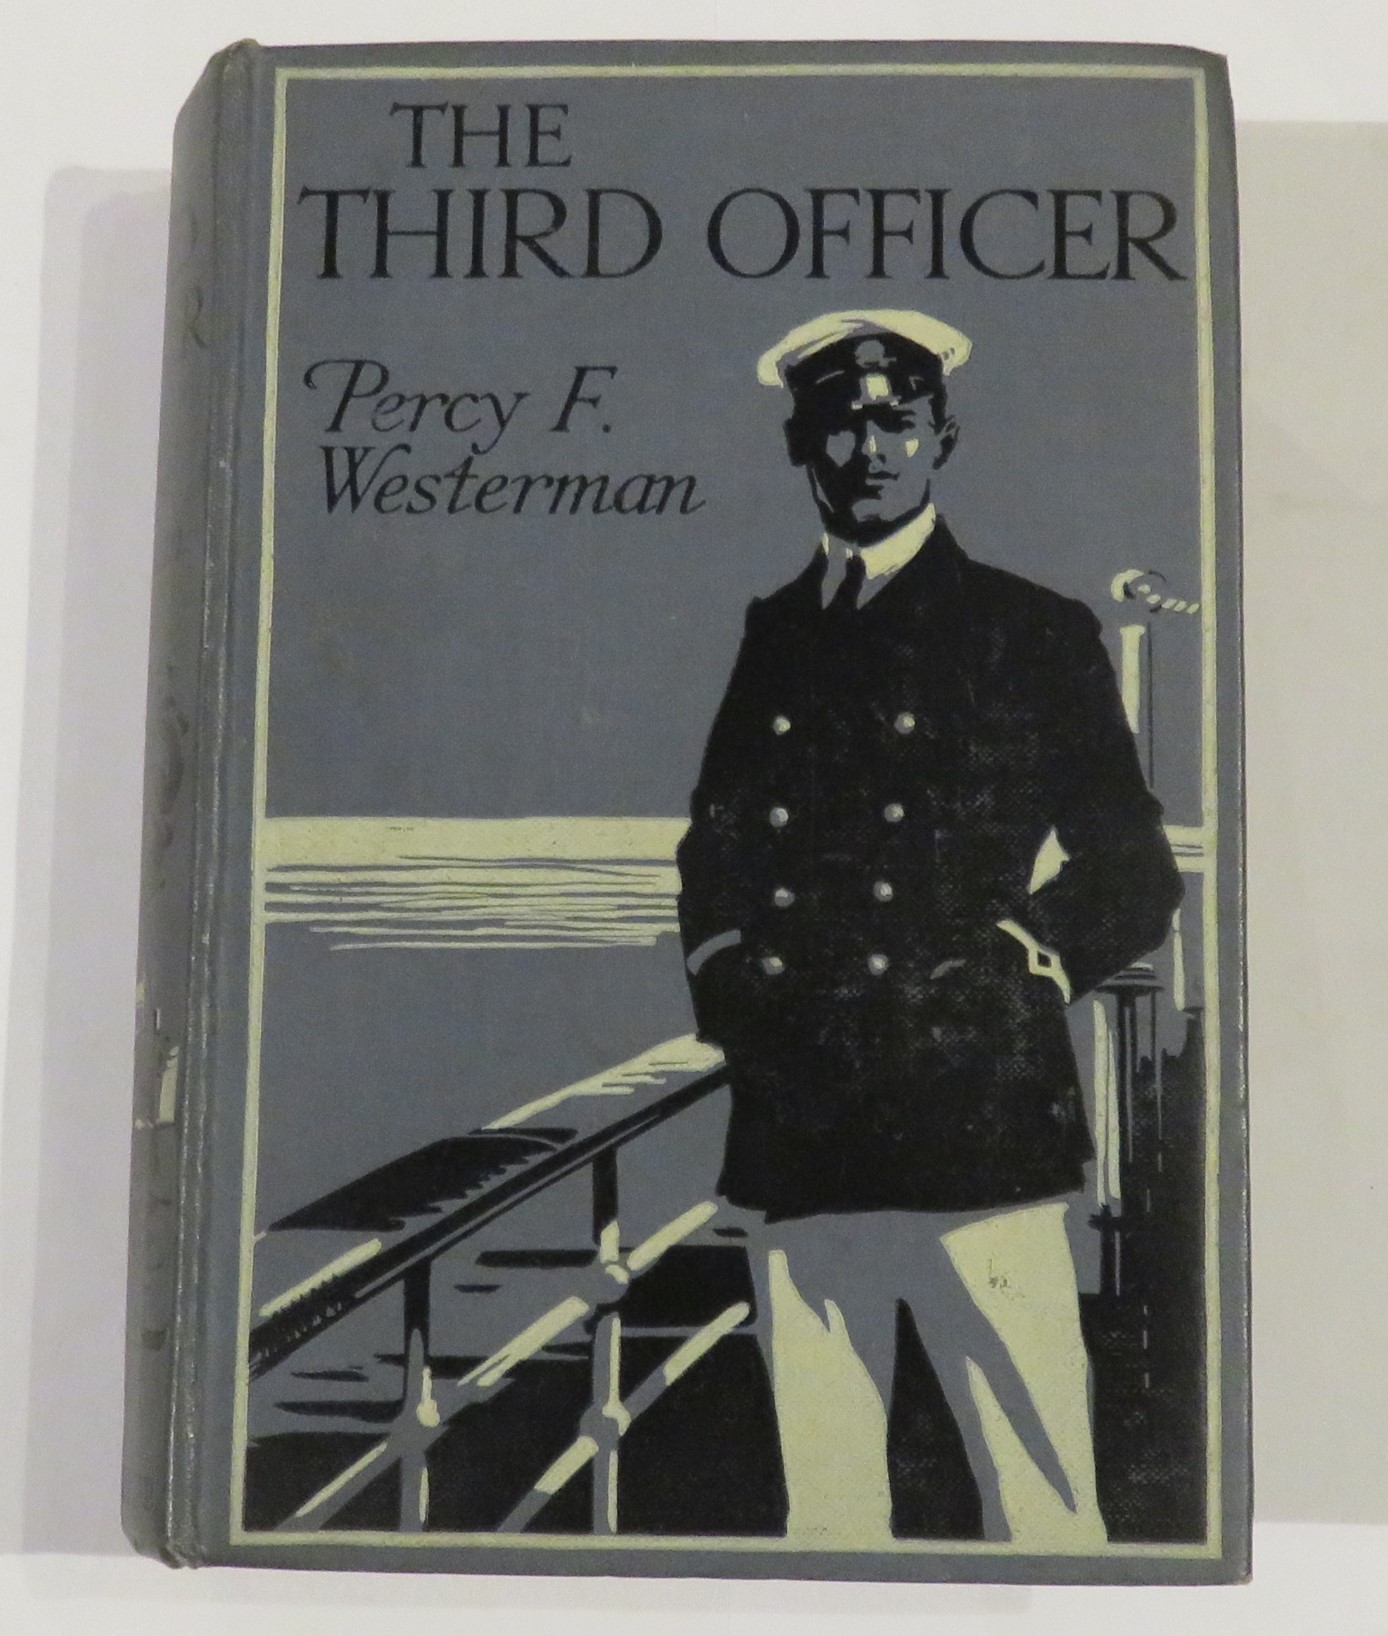 The Third Officer